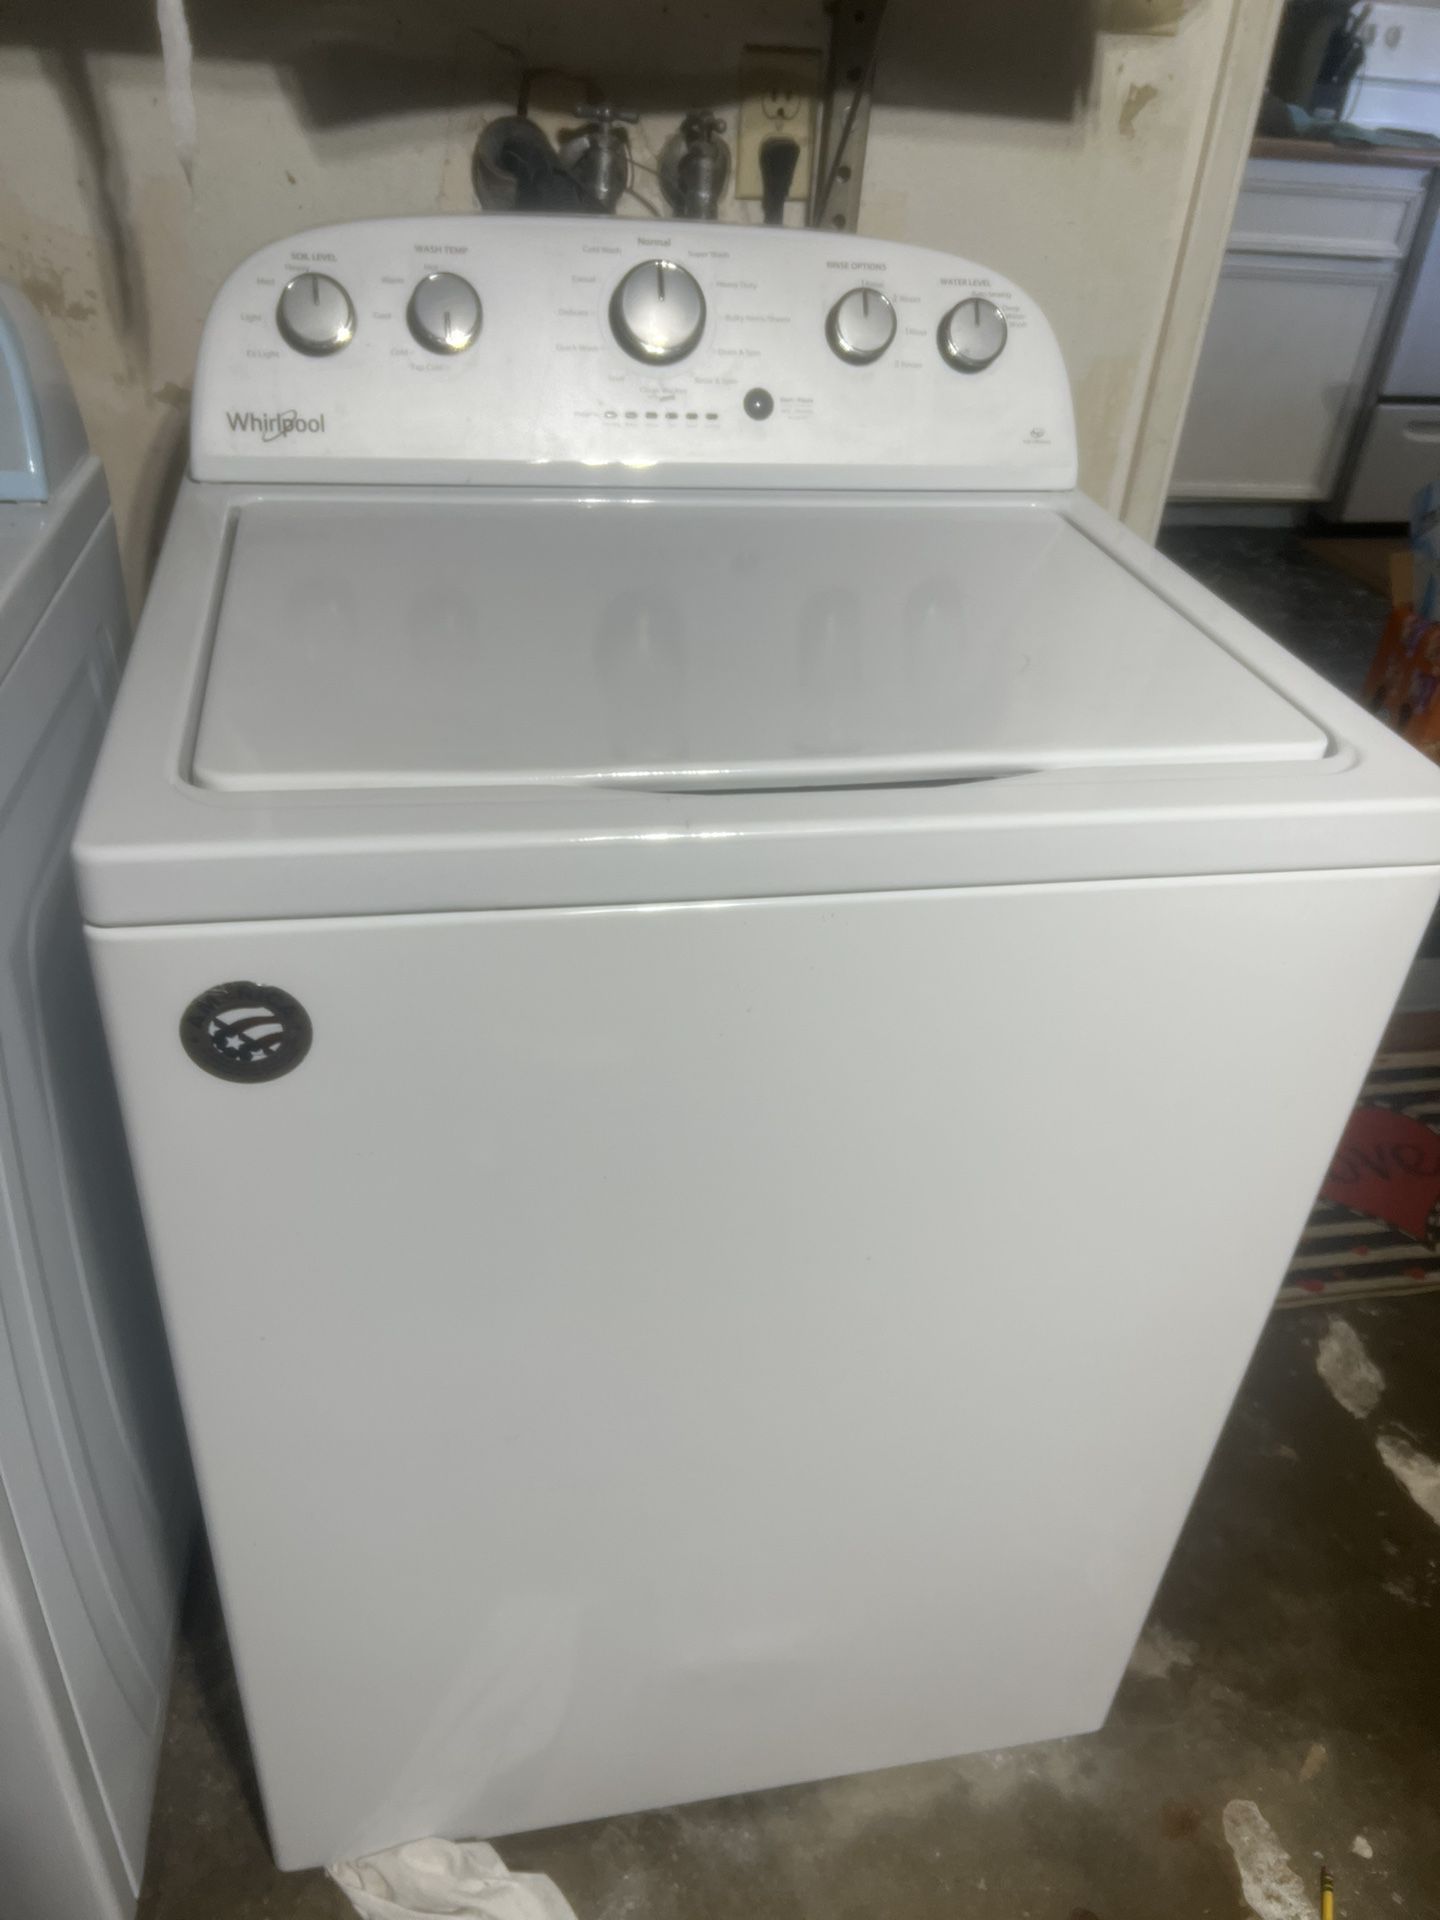 ELECTRIC Whirlpool washer/dryer set